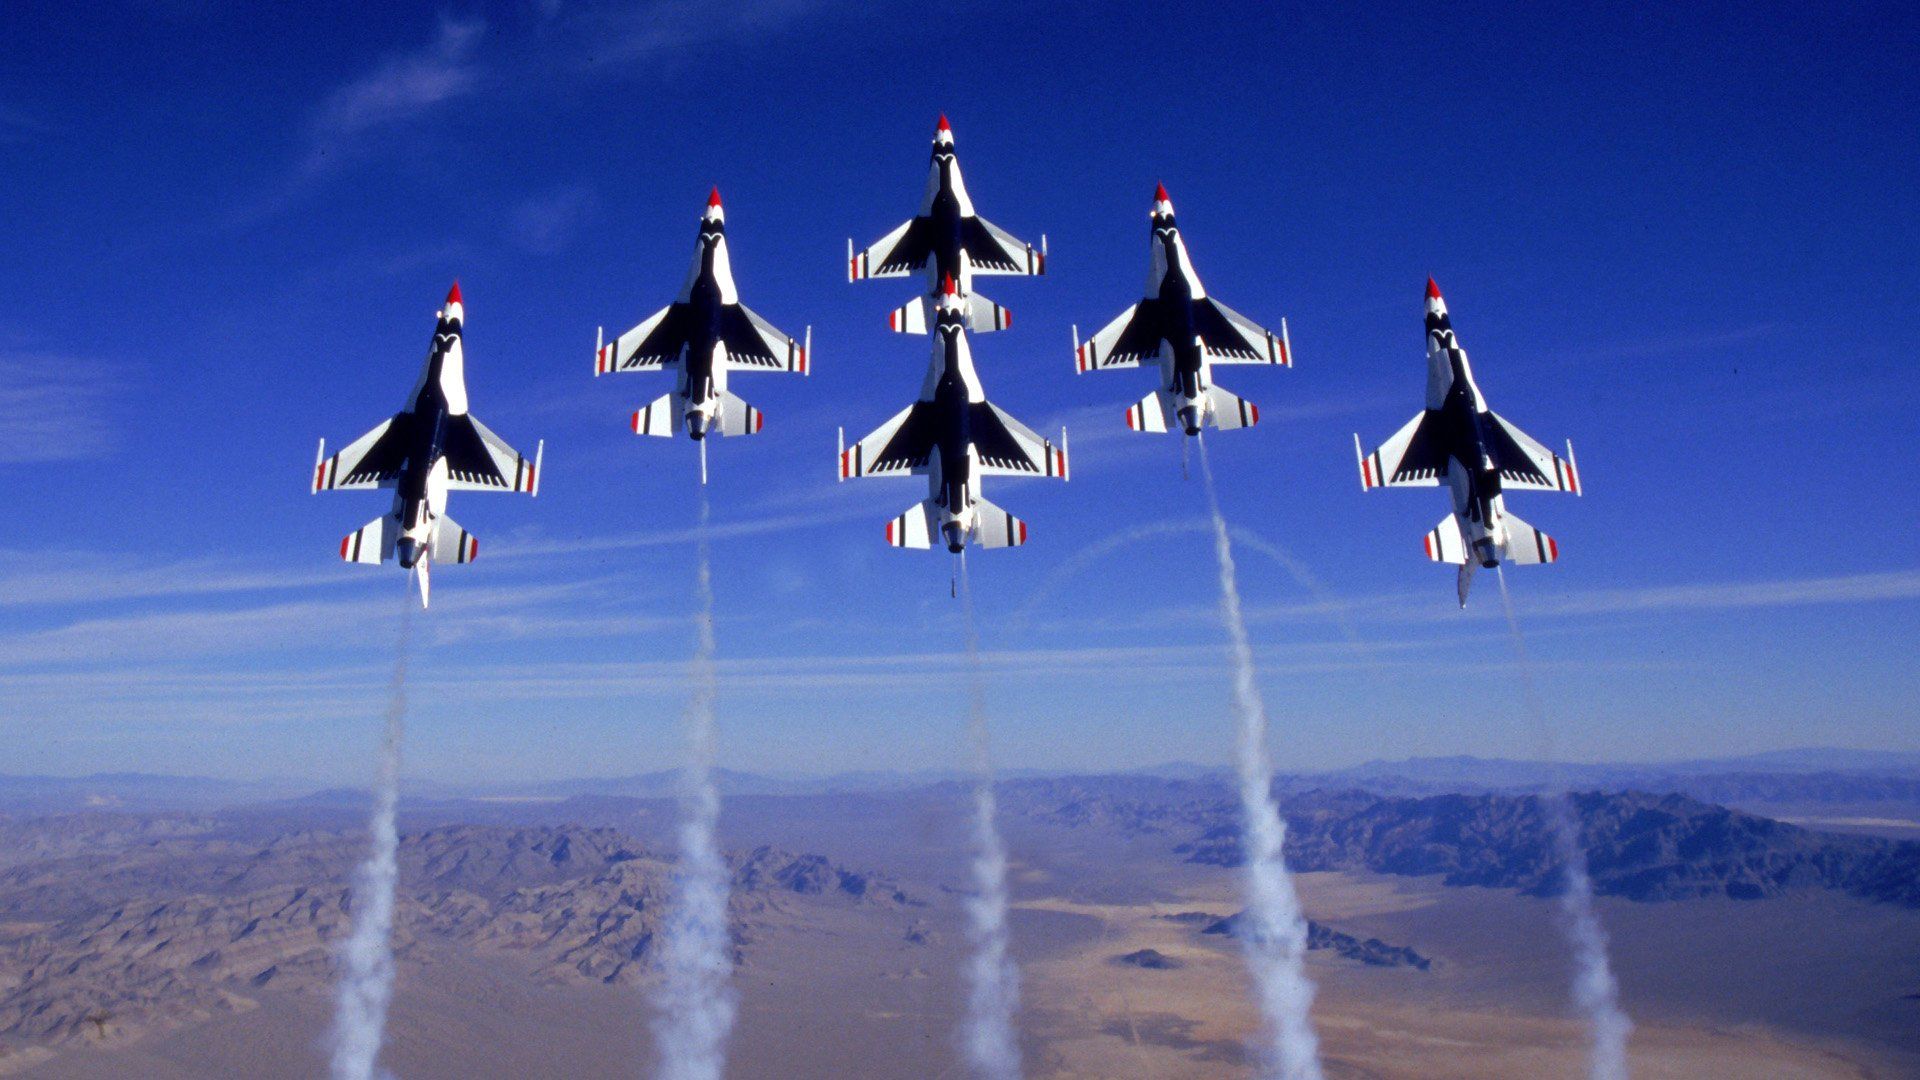 United States Air Force Thunderbirds Wallpapers